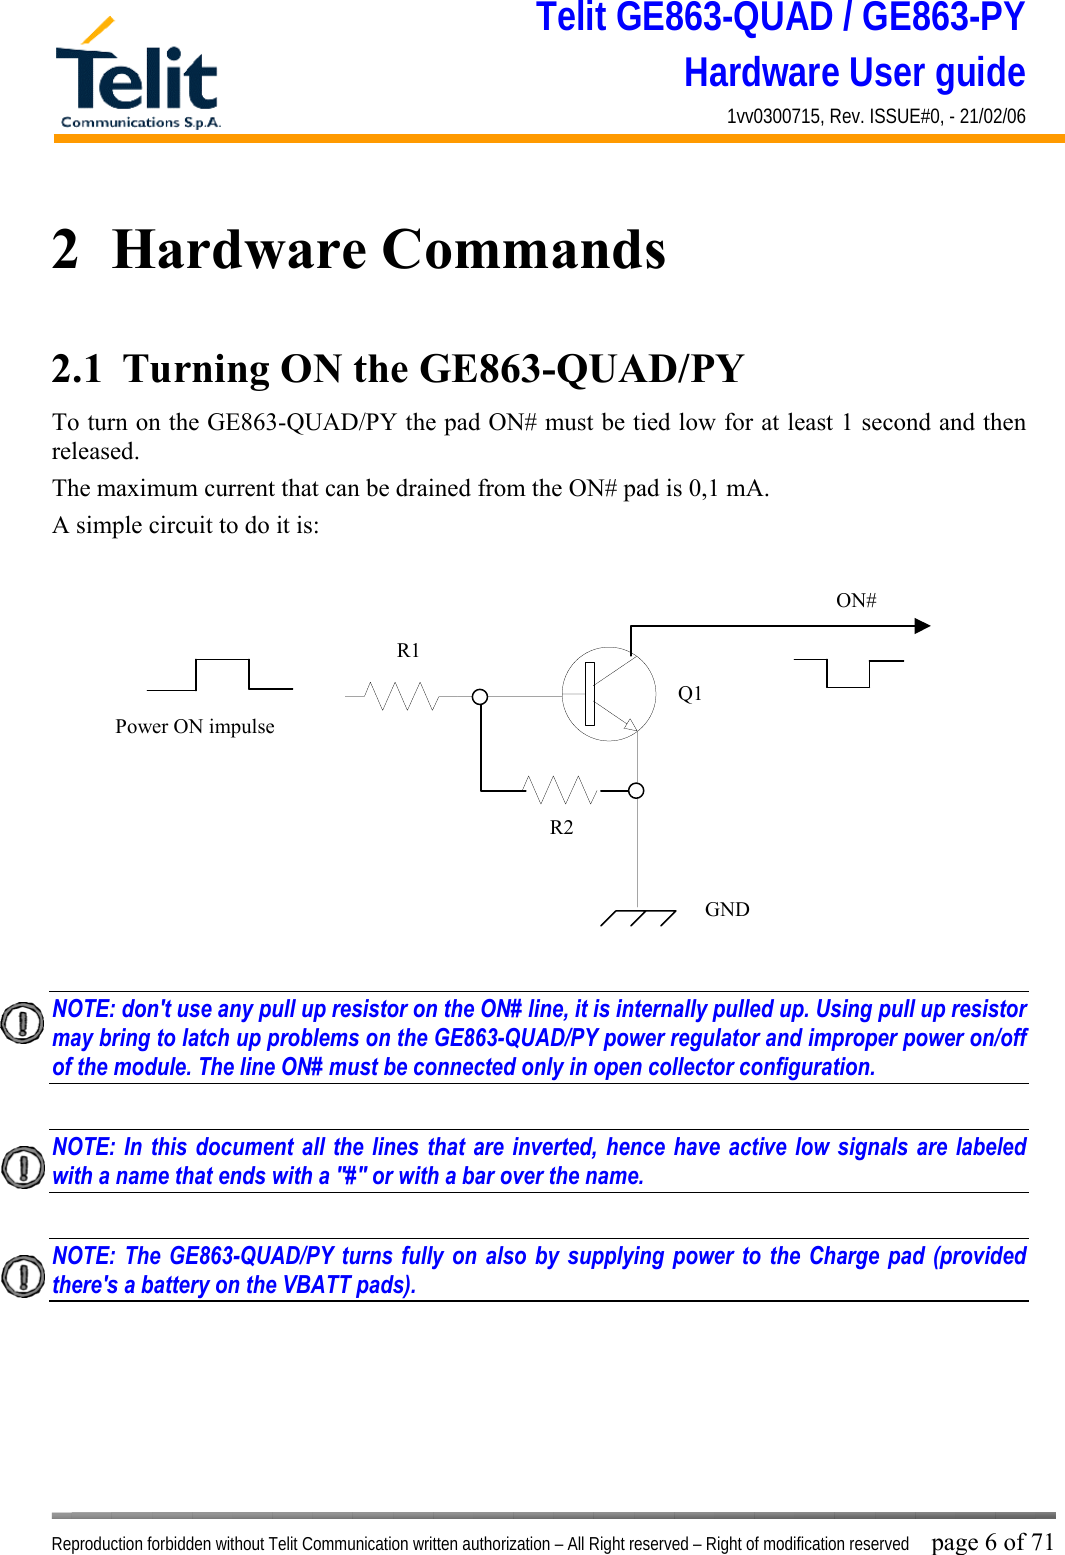 Telit GE863-QUAD / GE863-PY Hardware User guide 1vv0300715, Rev. ISSUE#0, - 21/02/06    Reproduction forbidden without Telit Communication written authorization – All Right reserved – Right of modification reserved page 6 of 71 2  Hardware Commands 2.1  Turning ON the GE863-QUAD/PY To turn on the GE863-QUAD/PY the pad ON# must be tied low for at least 1 second and then released. The maximum current that can be drained from the ON# pad is 0,1 mA. A simple circuit to do it is:   NOTE: don&apos;t use any pull up resistor on the ON# line, it is internally pulled up. Using pull up resistor may bring to latch up problems on the GE863-QUAD/PY power regulator and improper power on/off of the module. The line ON# must be connected only in open collector configuration.  NOTE: In this document all the lines that are inverted, hence have active low signals are labeled with a name that ends with a &quot;#&quot; or with a bar over the name.  NOTE: The GE863-QUAD/PY turns fully on also by supplying power to the Charge pad (provided there&apos;s a battery on the VBATT pads).        ON#Power ON impulse  GNDR1R2Q1